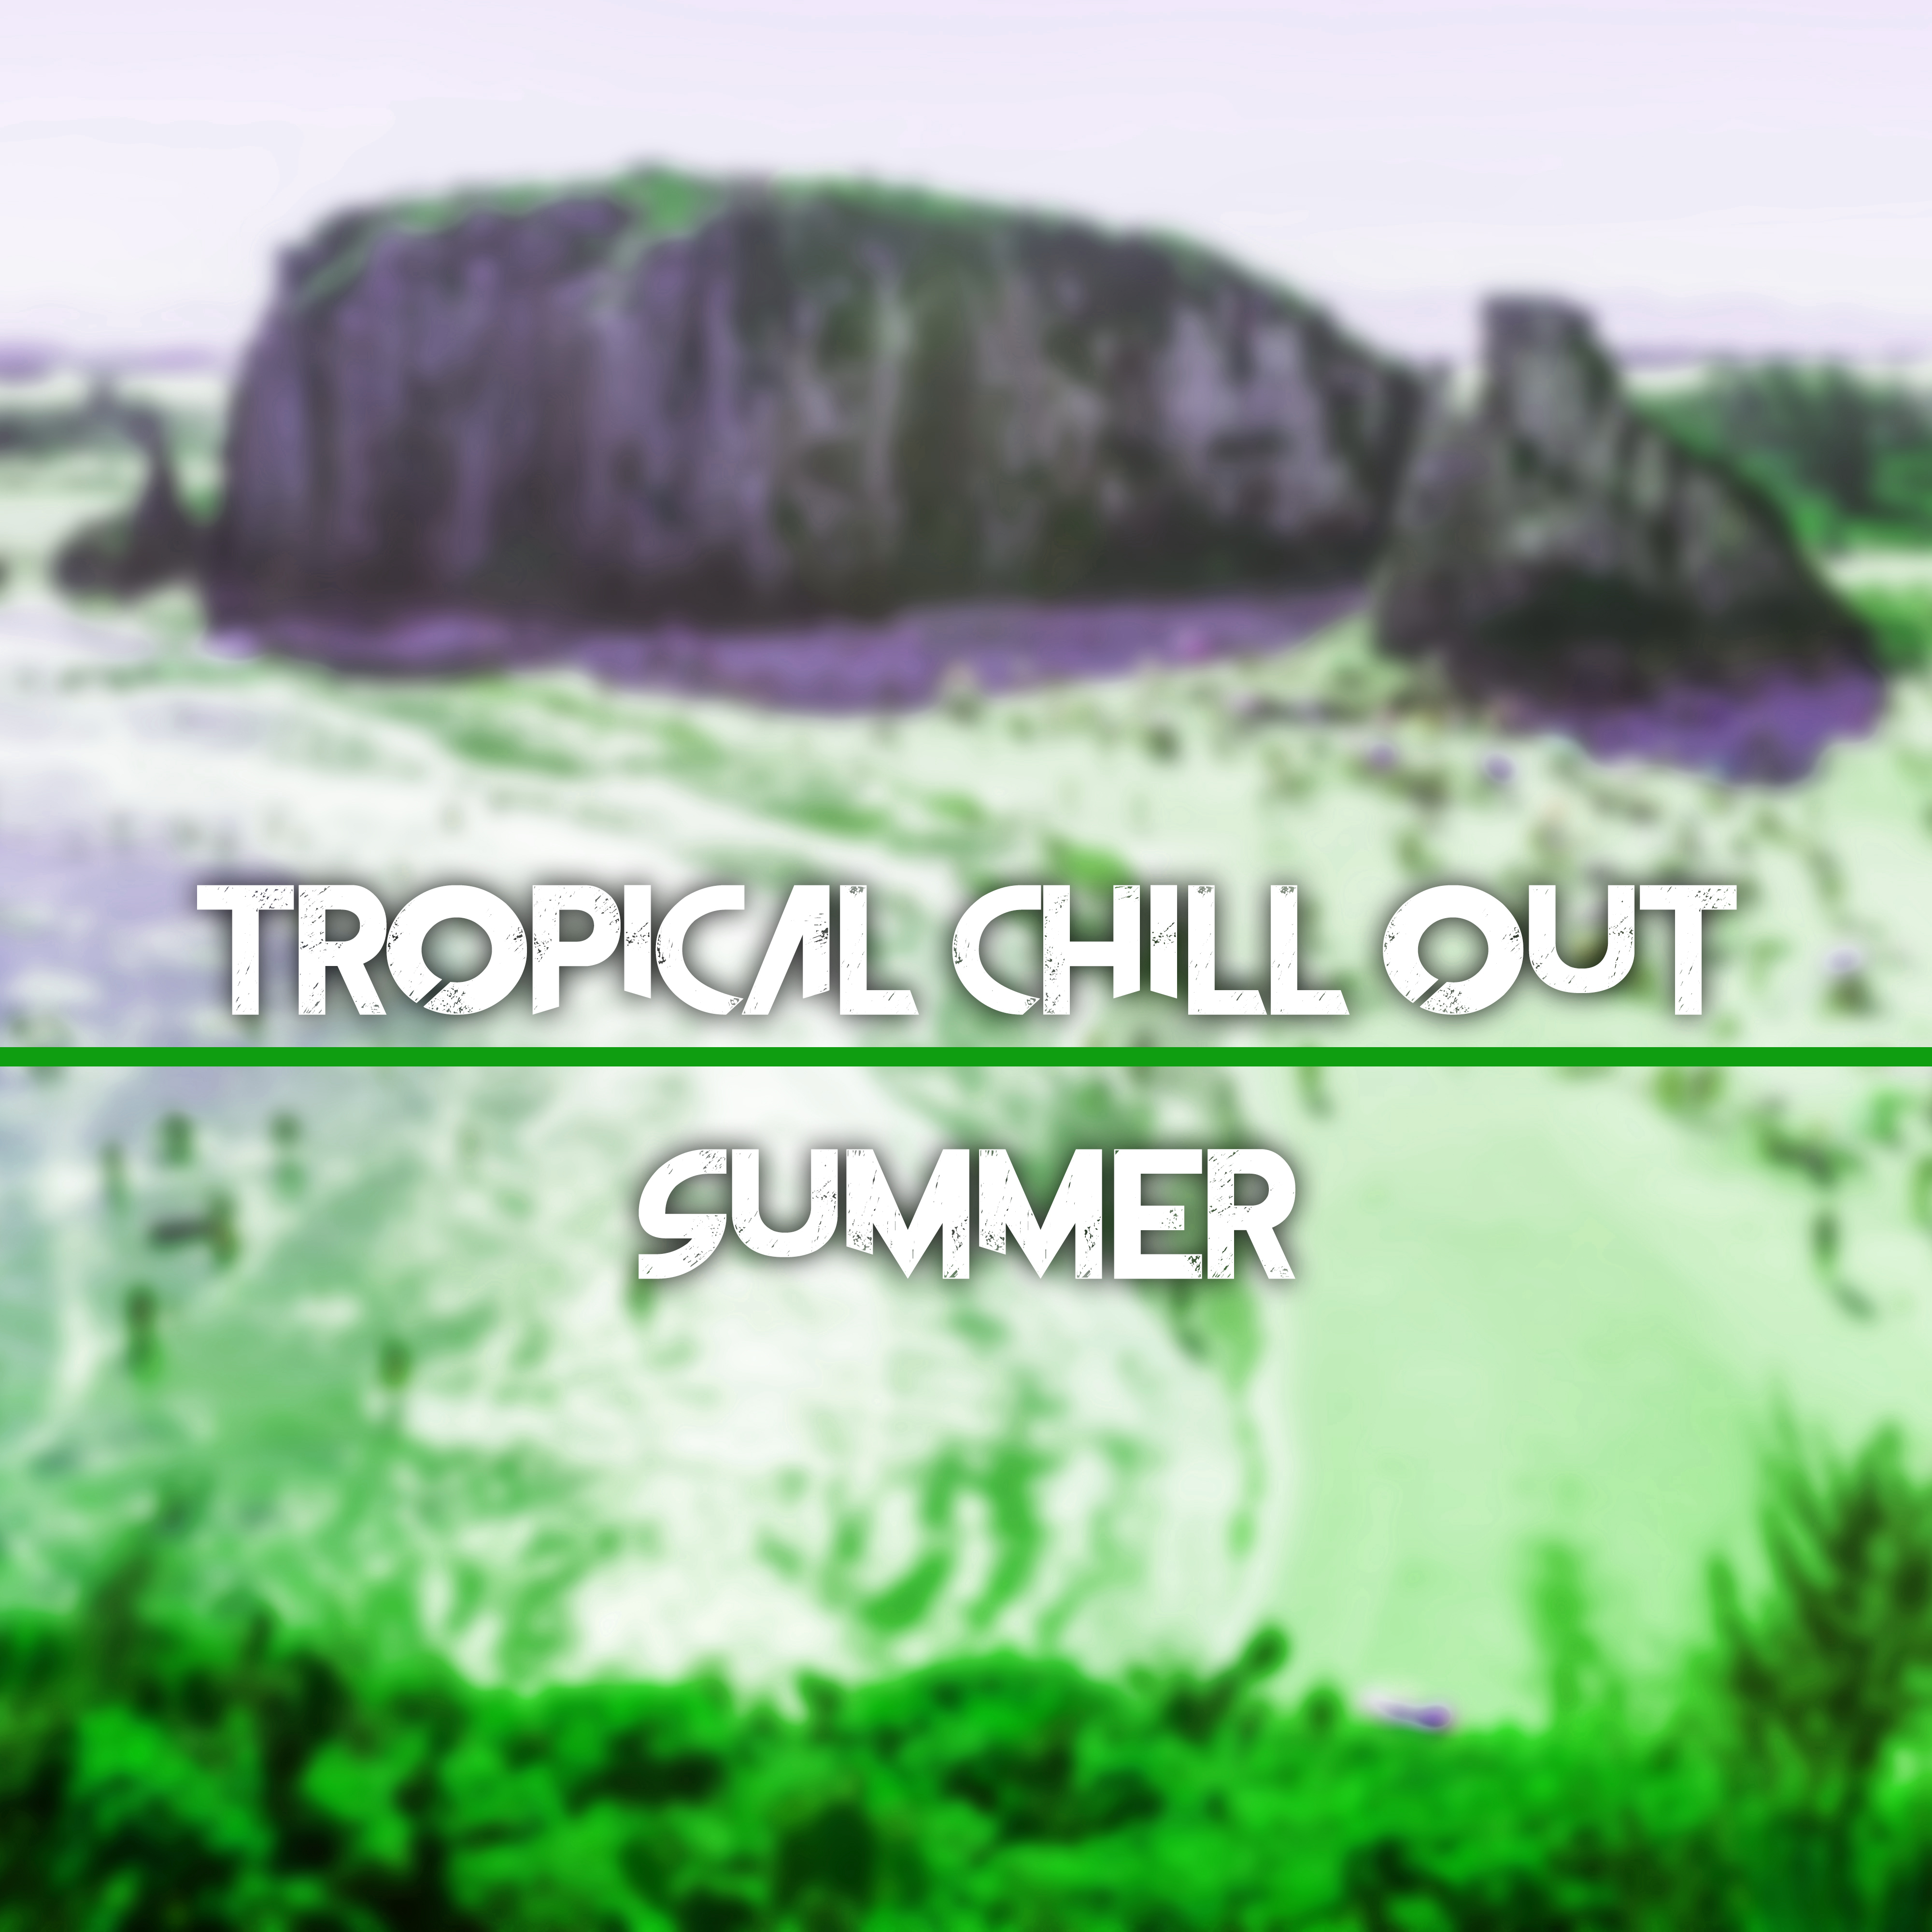 Tropical Chill Out Summer – Sunny Day, Summer Vibes, Holiday Relaxation, Stress Relief